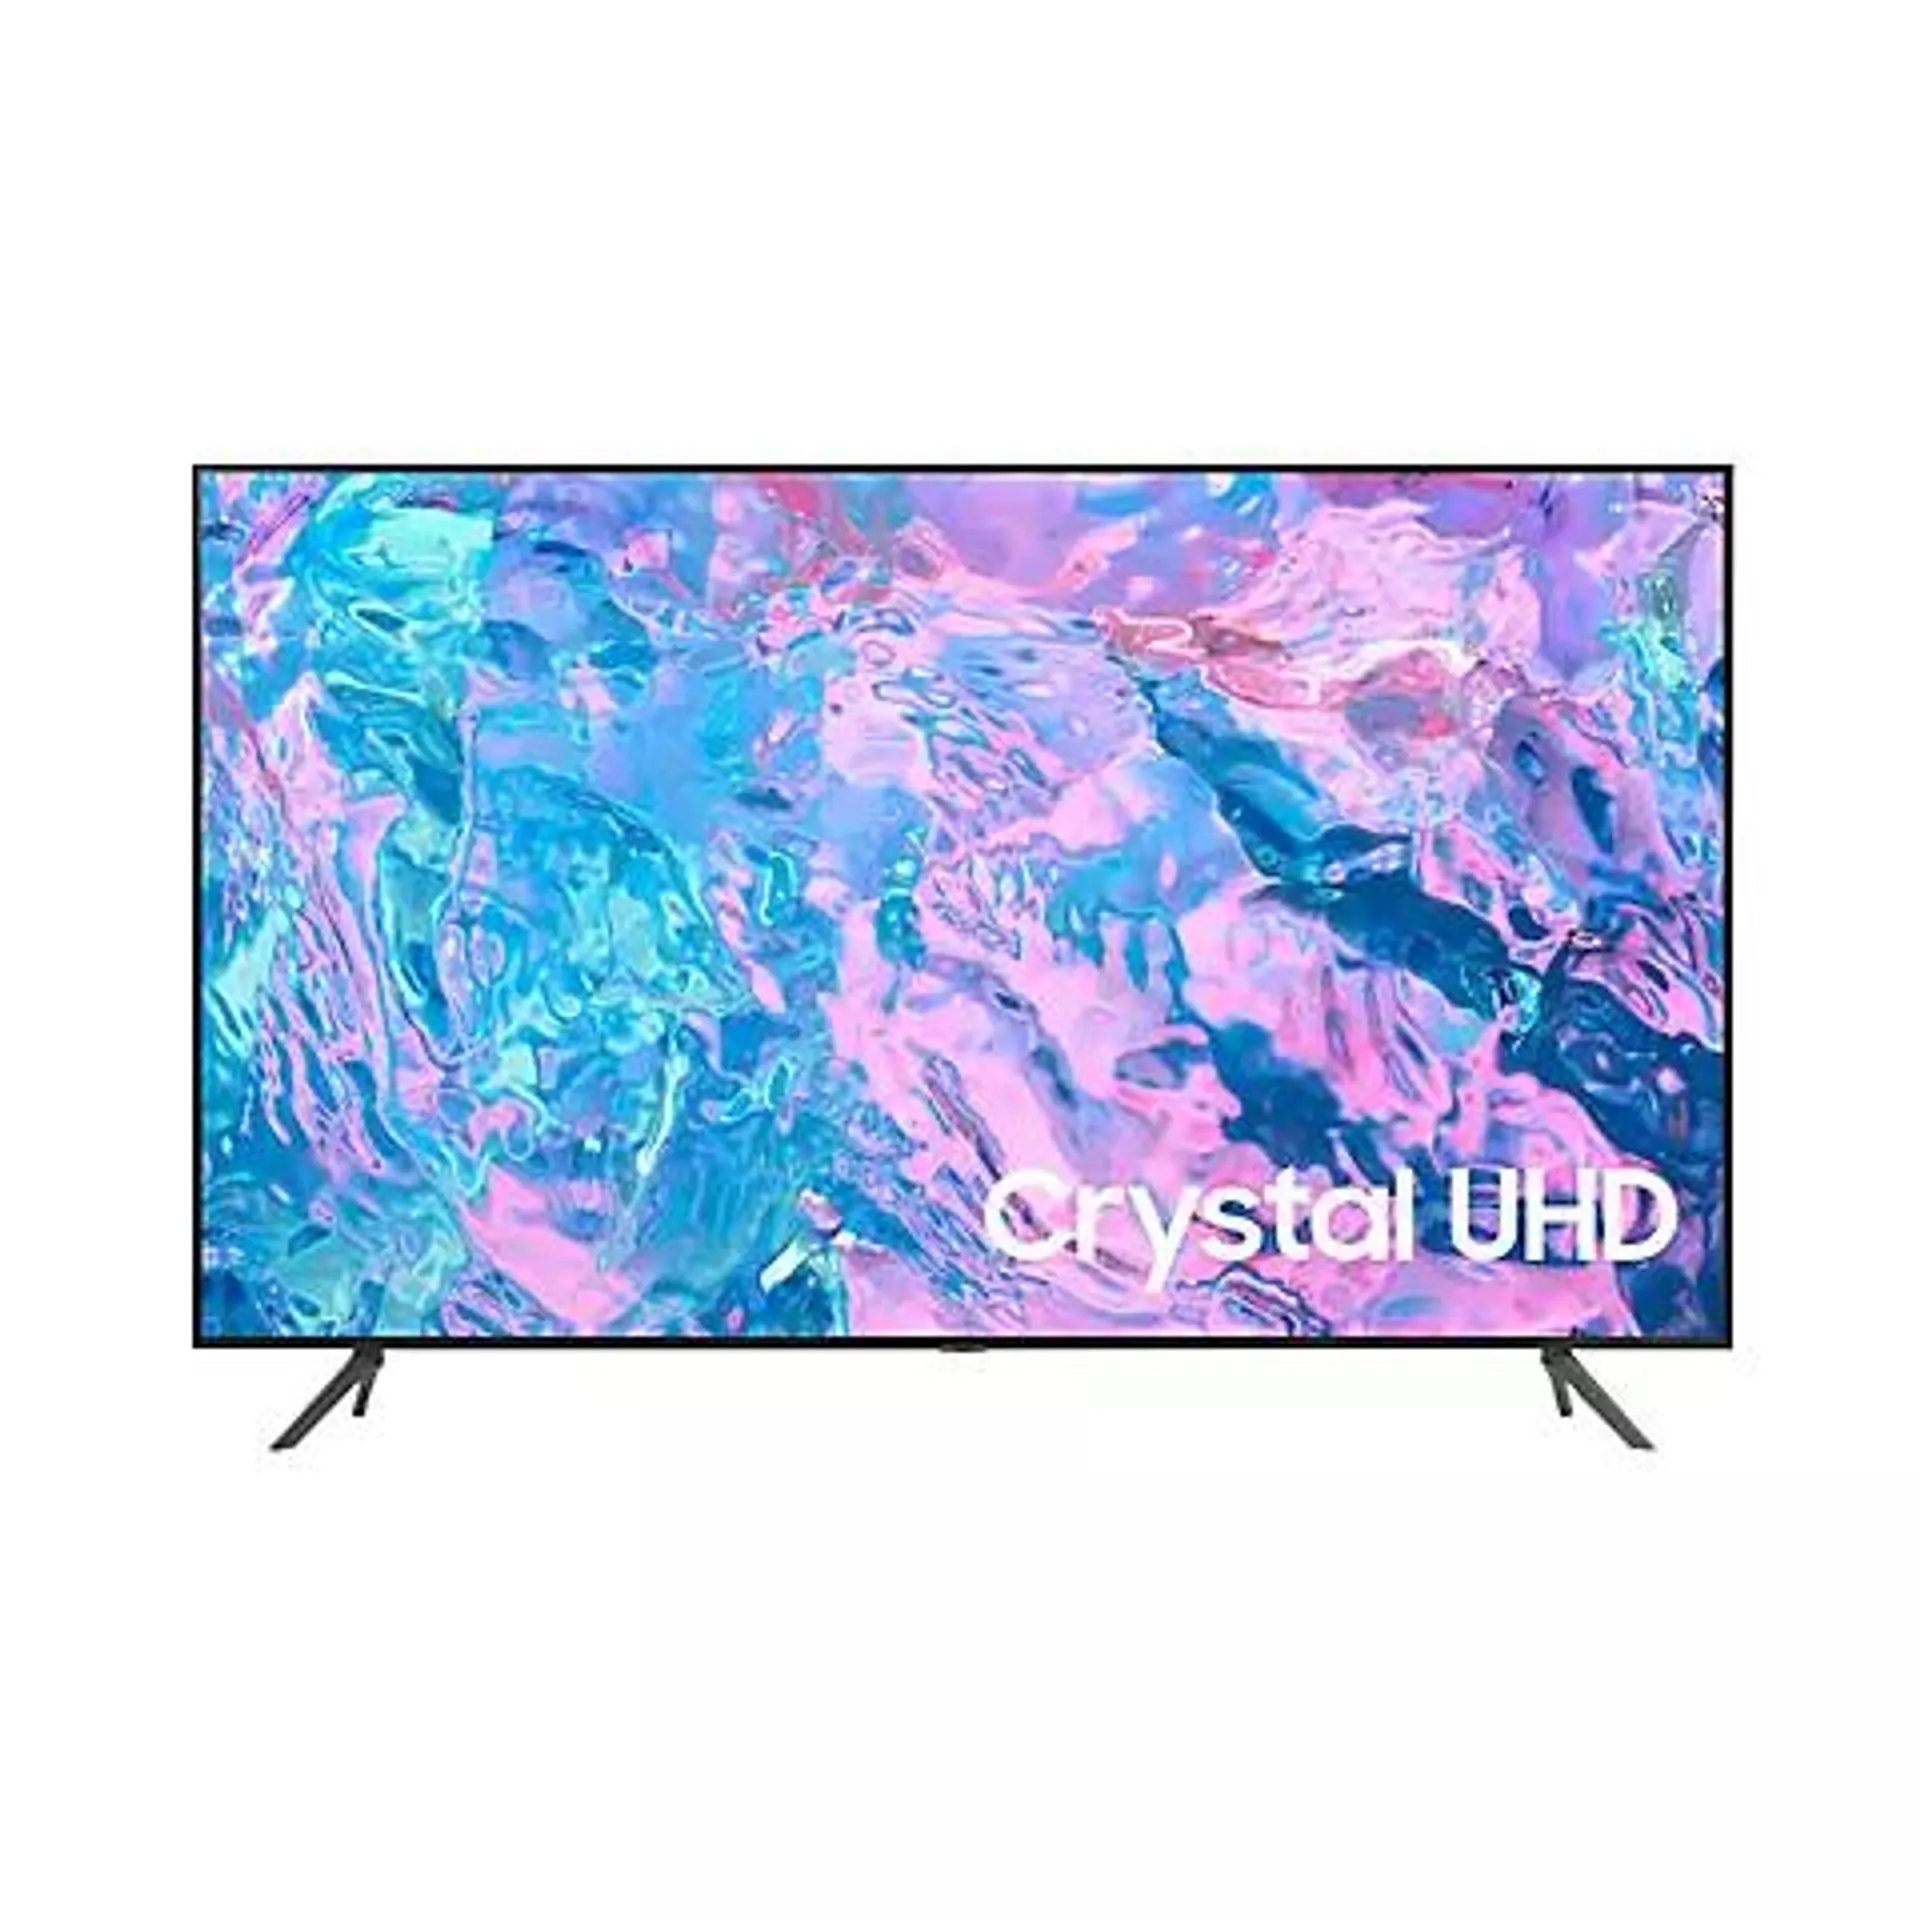 Samsung 65" CU7000 Crystal UHD 4K Smart TV with 4-Year Coverage